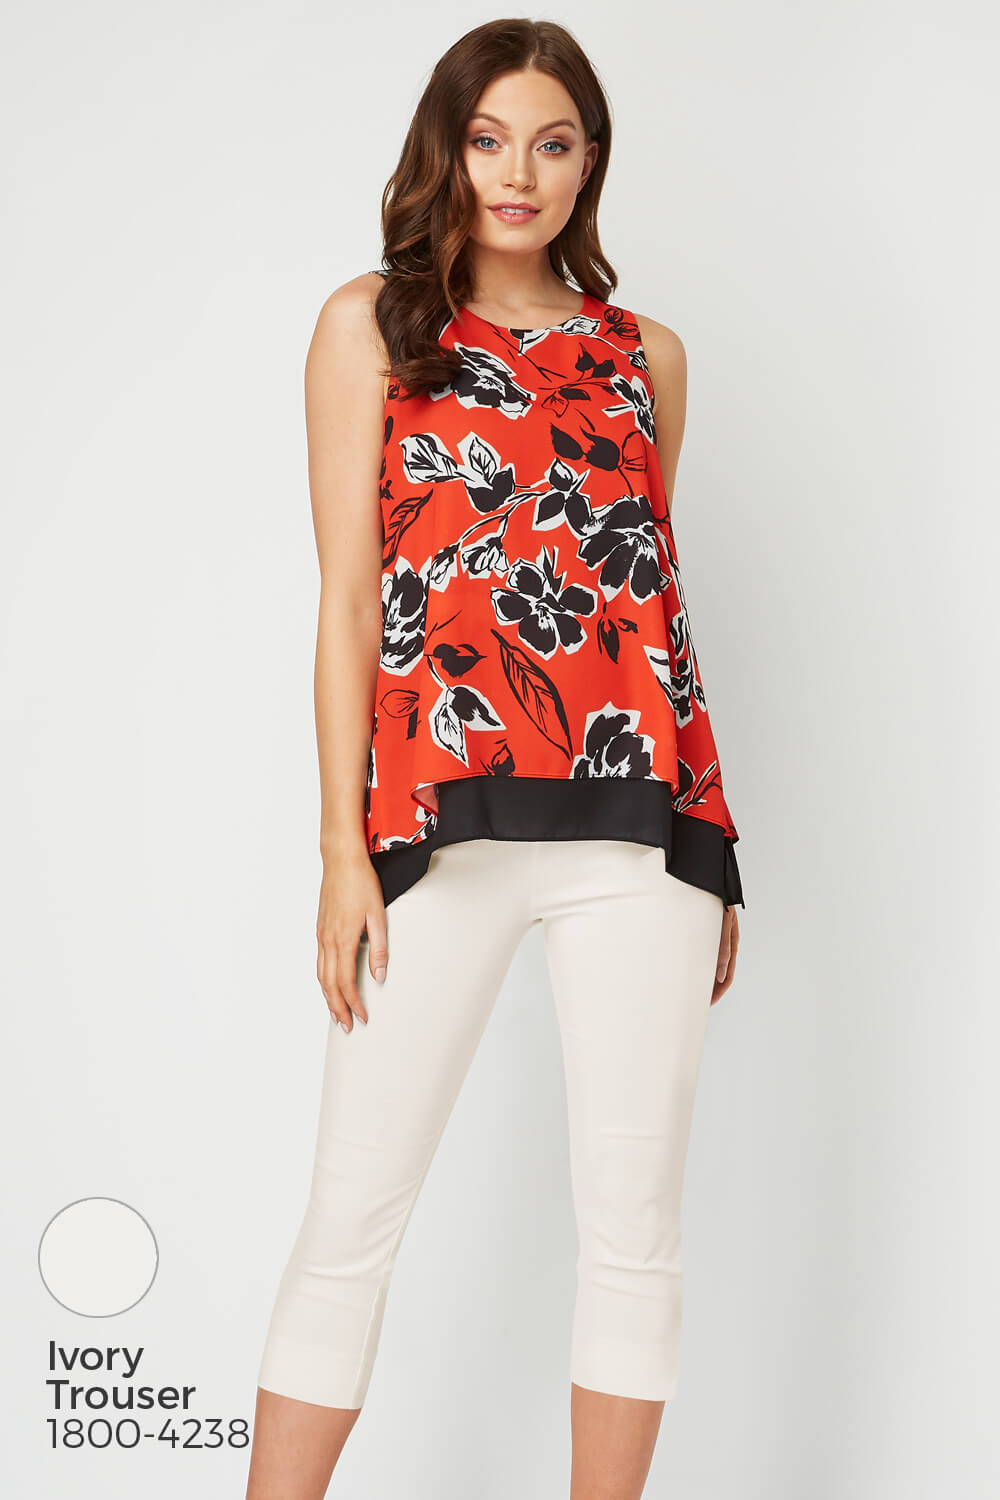 Red Sleeveless Floral Contrast Top, Image 8 of 8